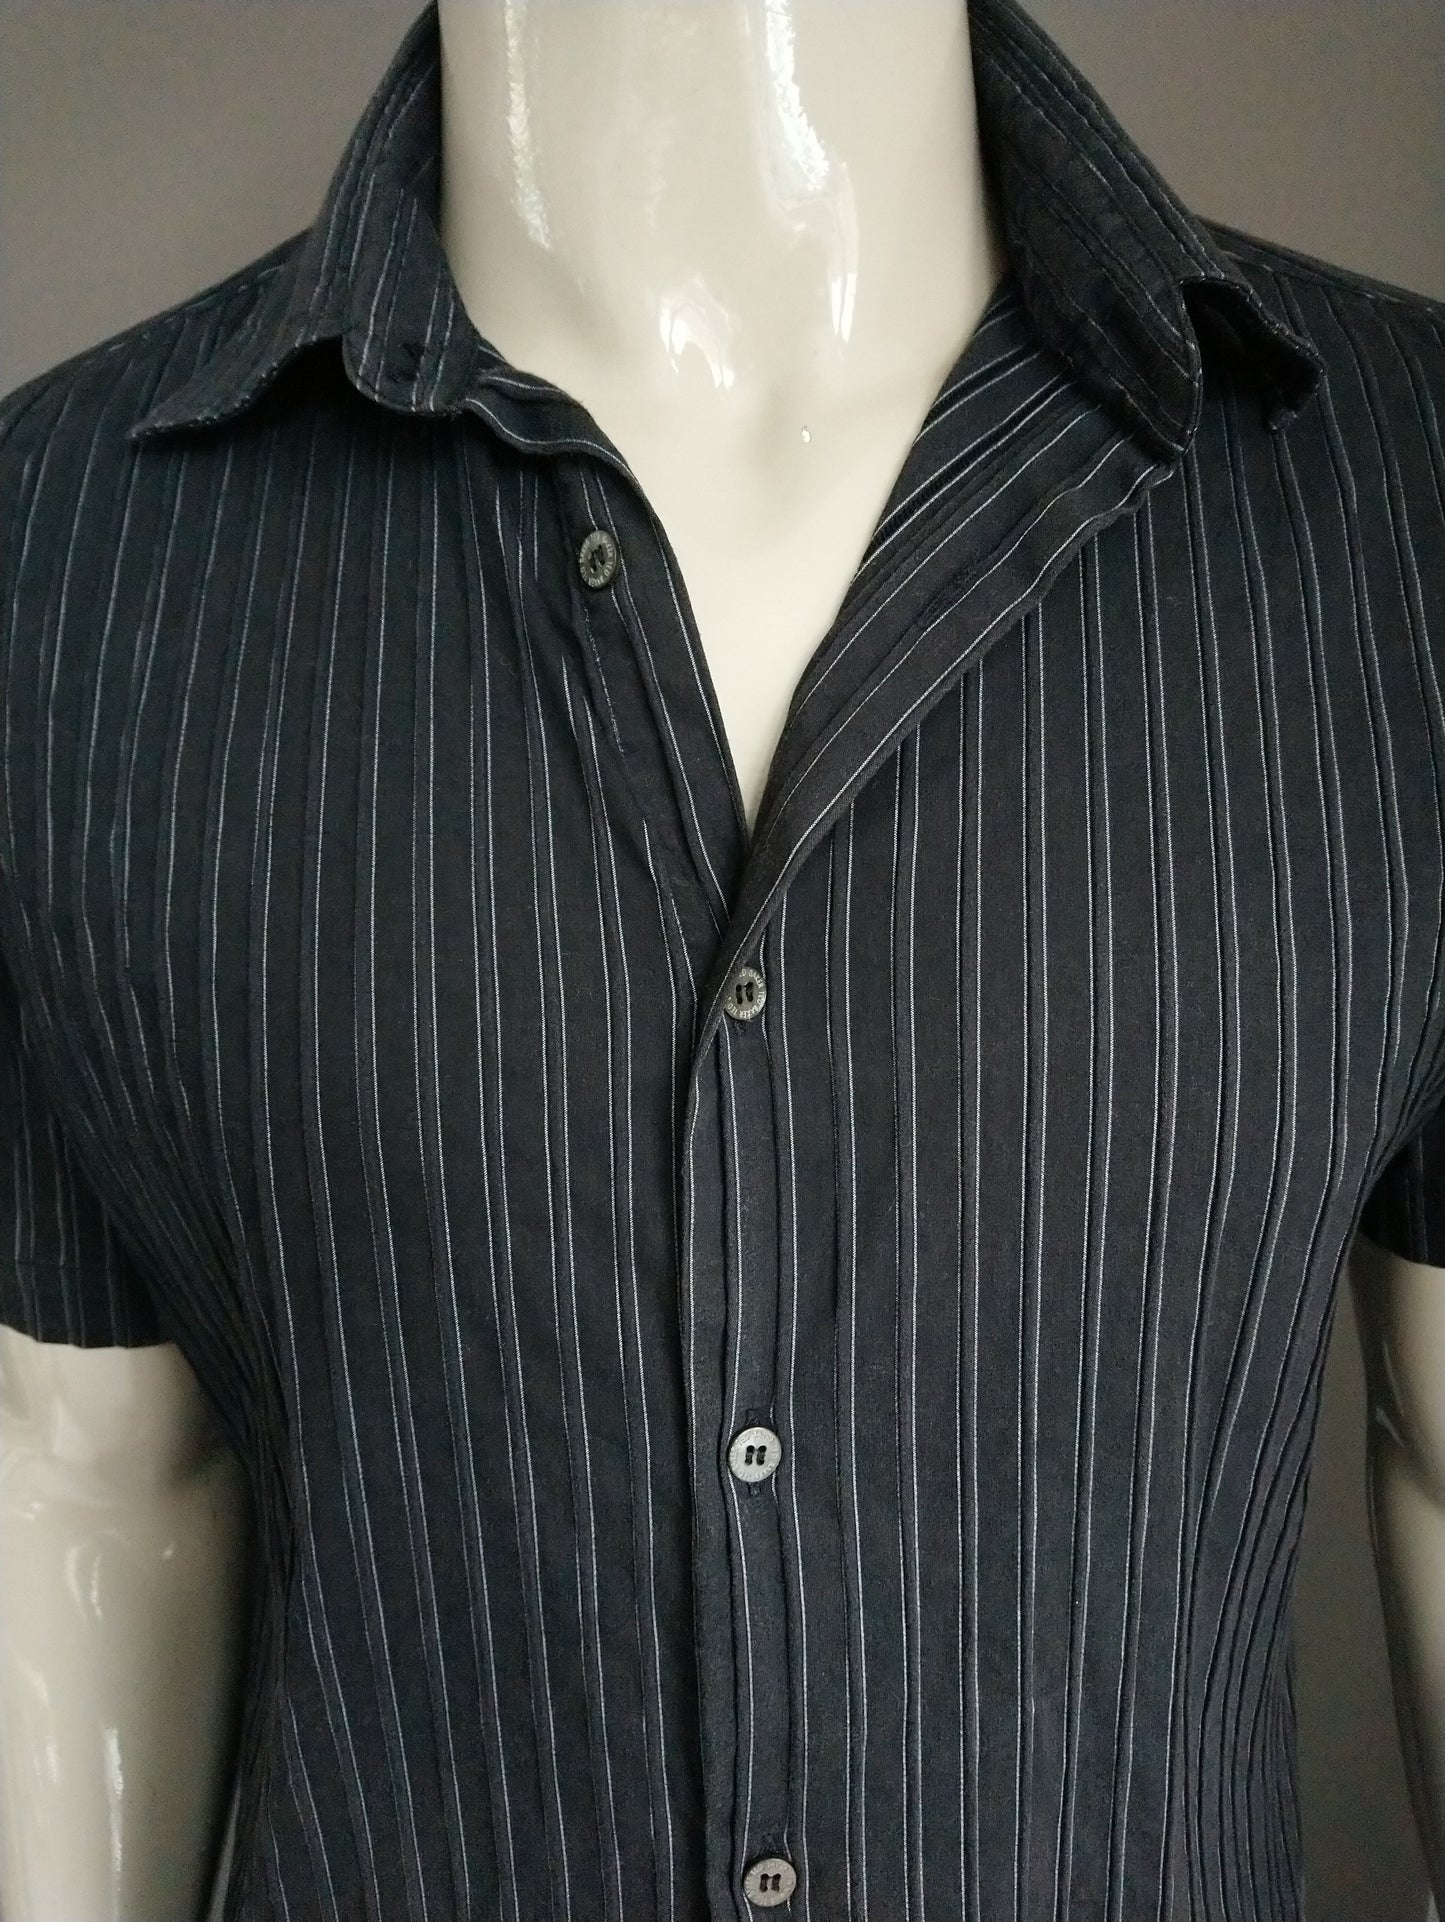 Ted baker shirt short sleeve. Black gray striped. Feelable motif. Size L. Stretch.